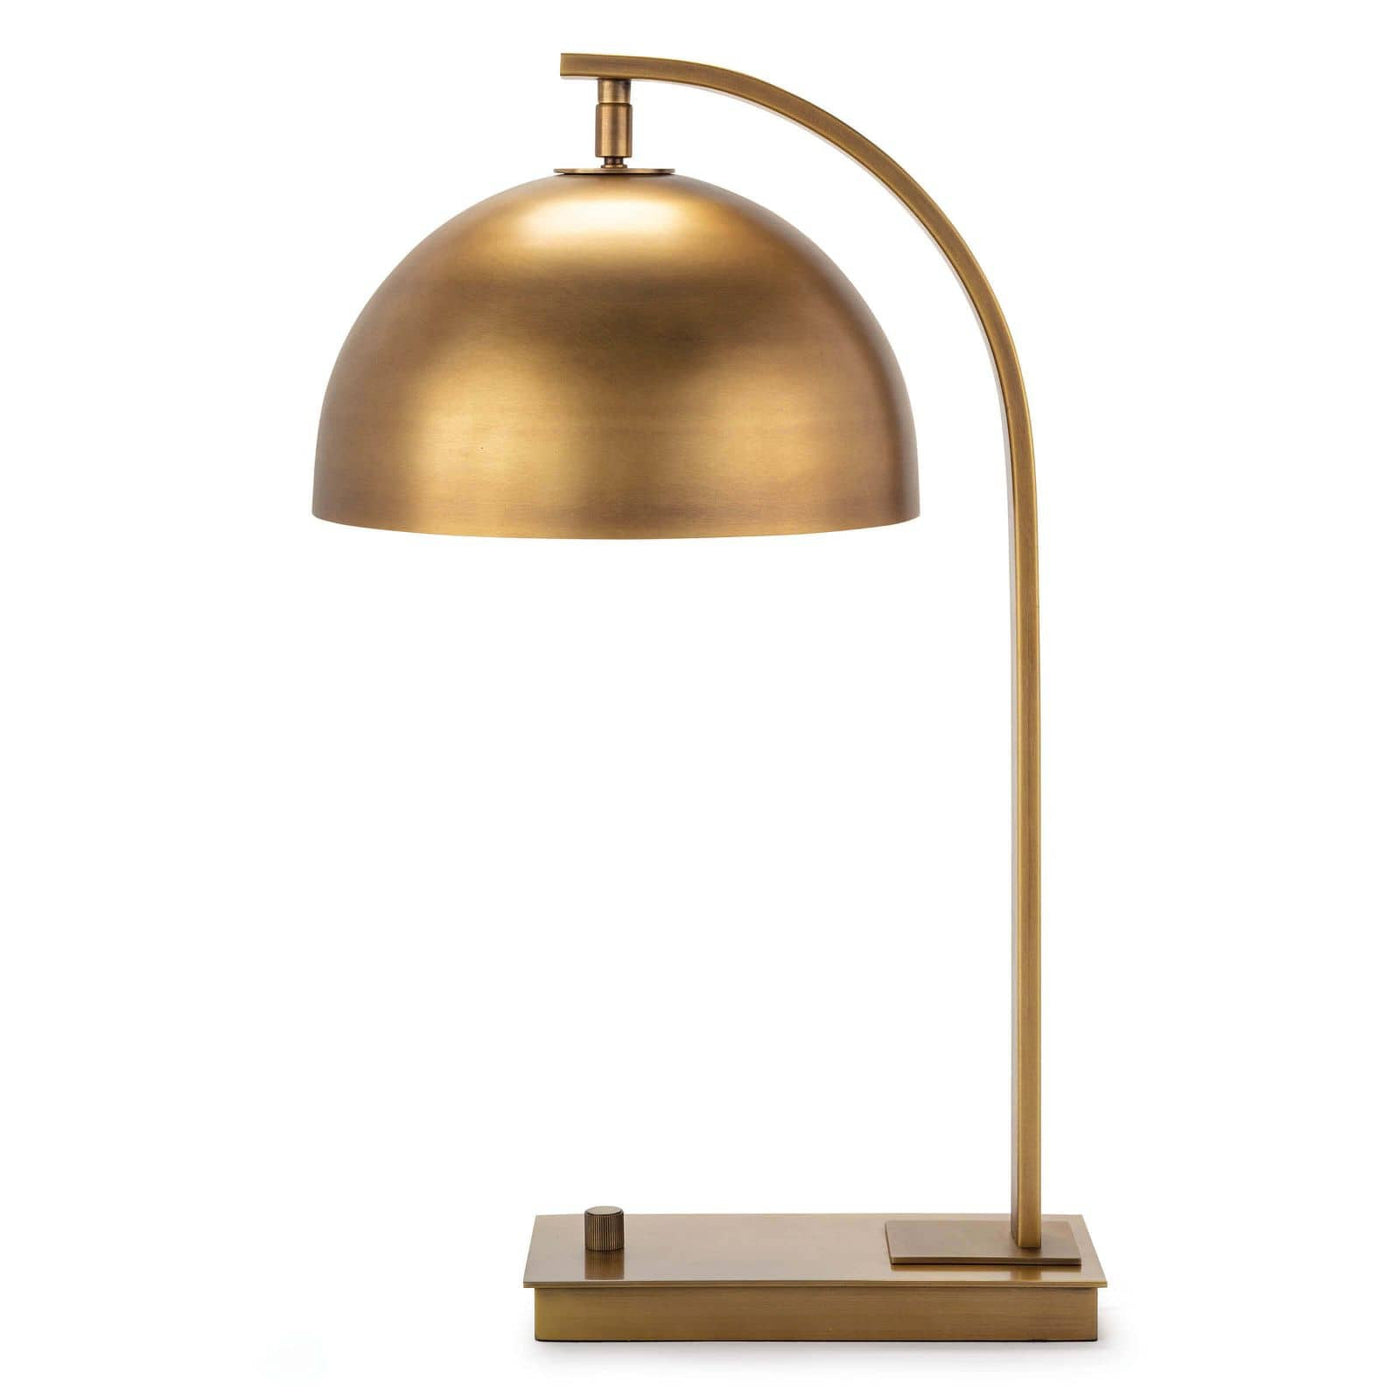 DESK LAMP METAL DOME (Available in 3 Finishes)